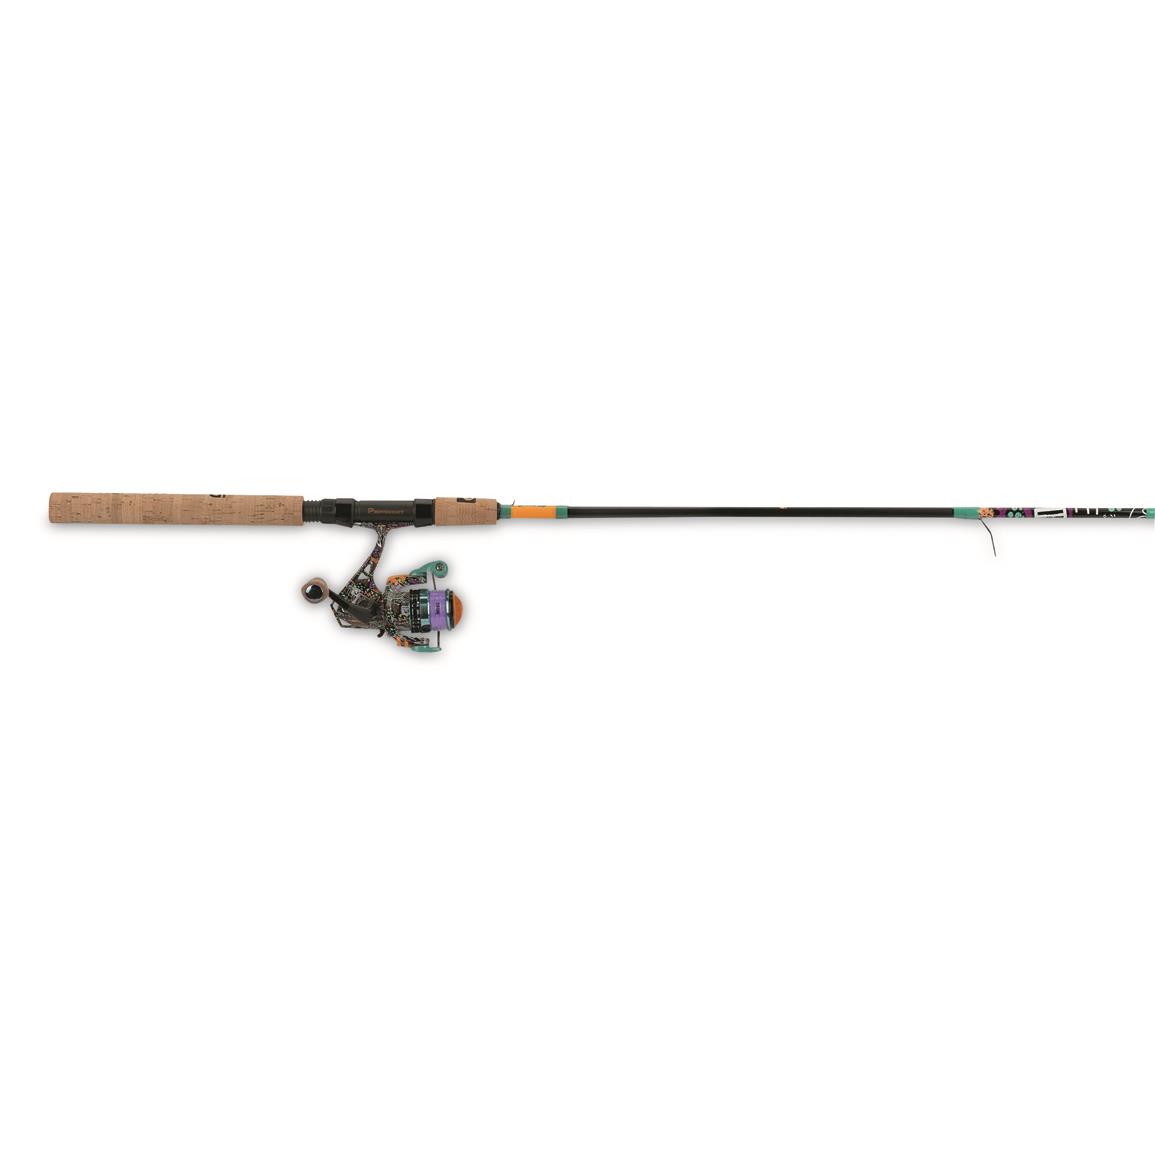 Big Cat Spinning Combo - 5.0-1 Gear Ratio, 9' Length, 2pc Rod, 10-30 lb Line Rate, 1/4-3/4 oz Lure Rate - Zebco / Quantum